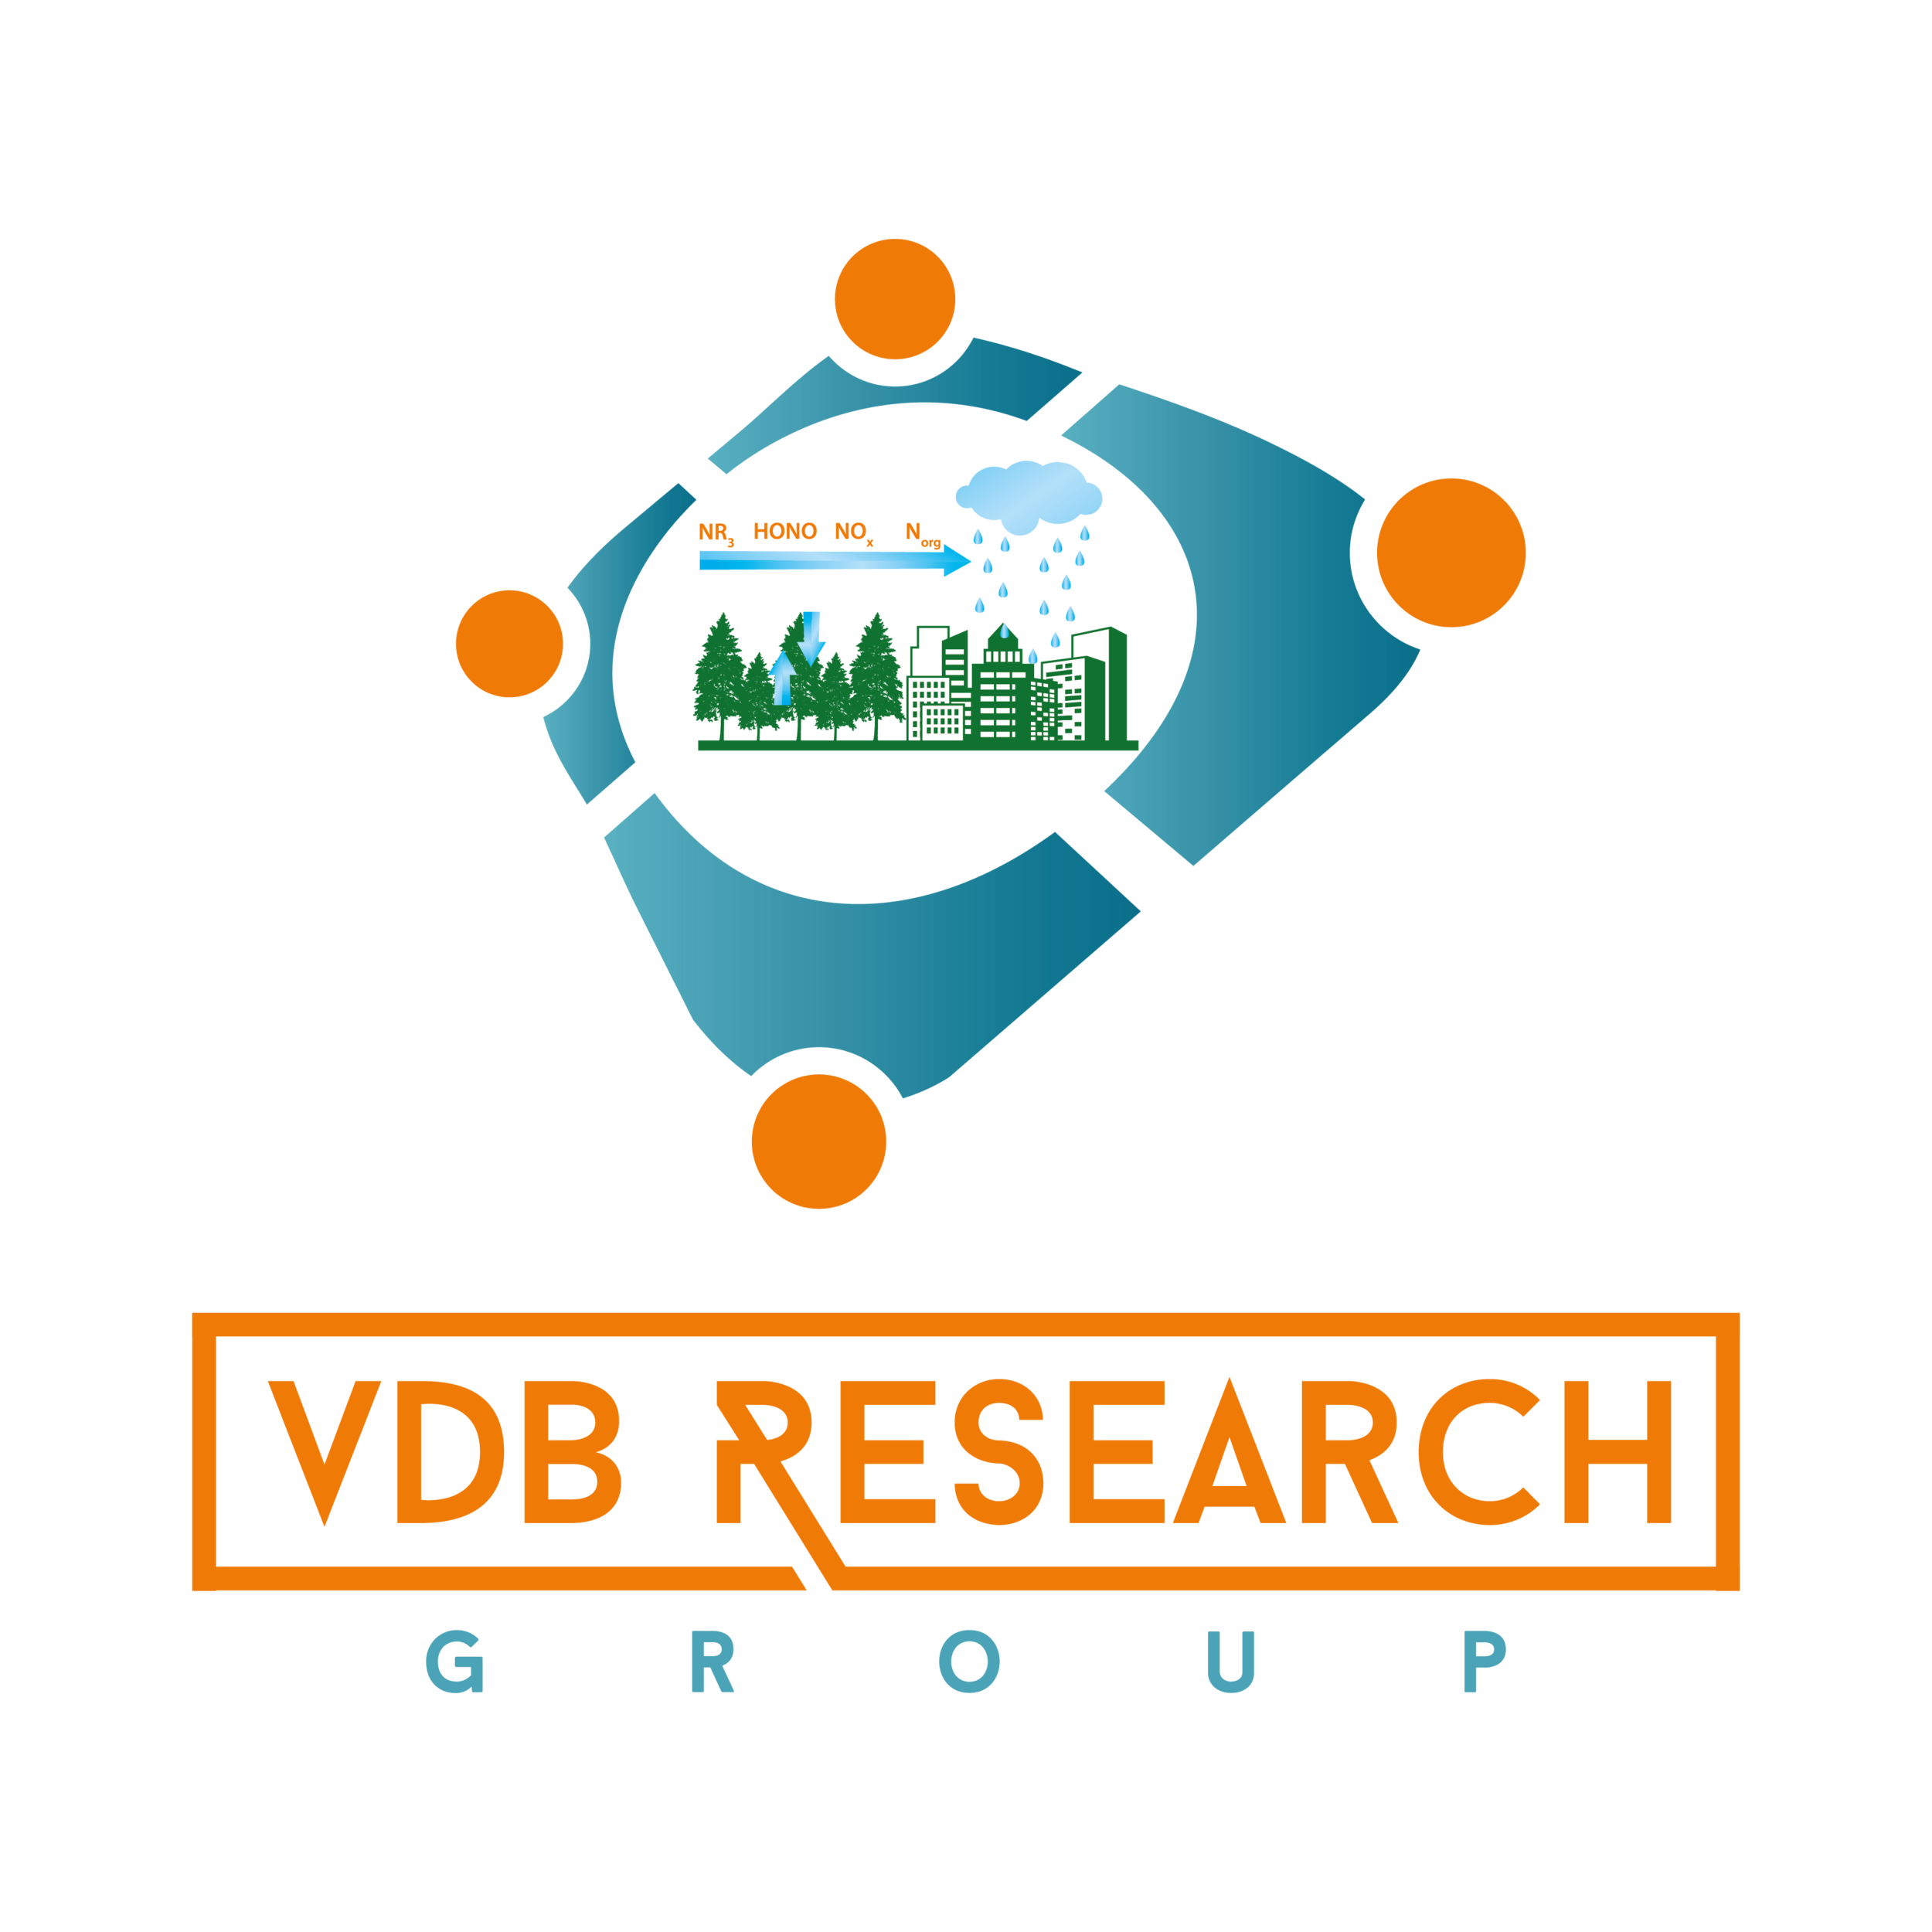 VDB Research Group